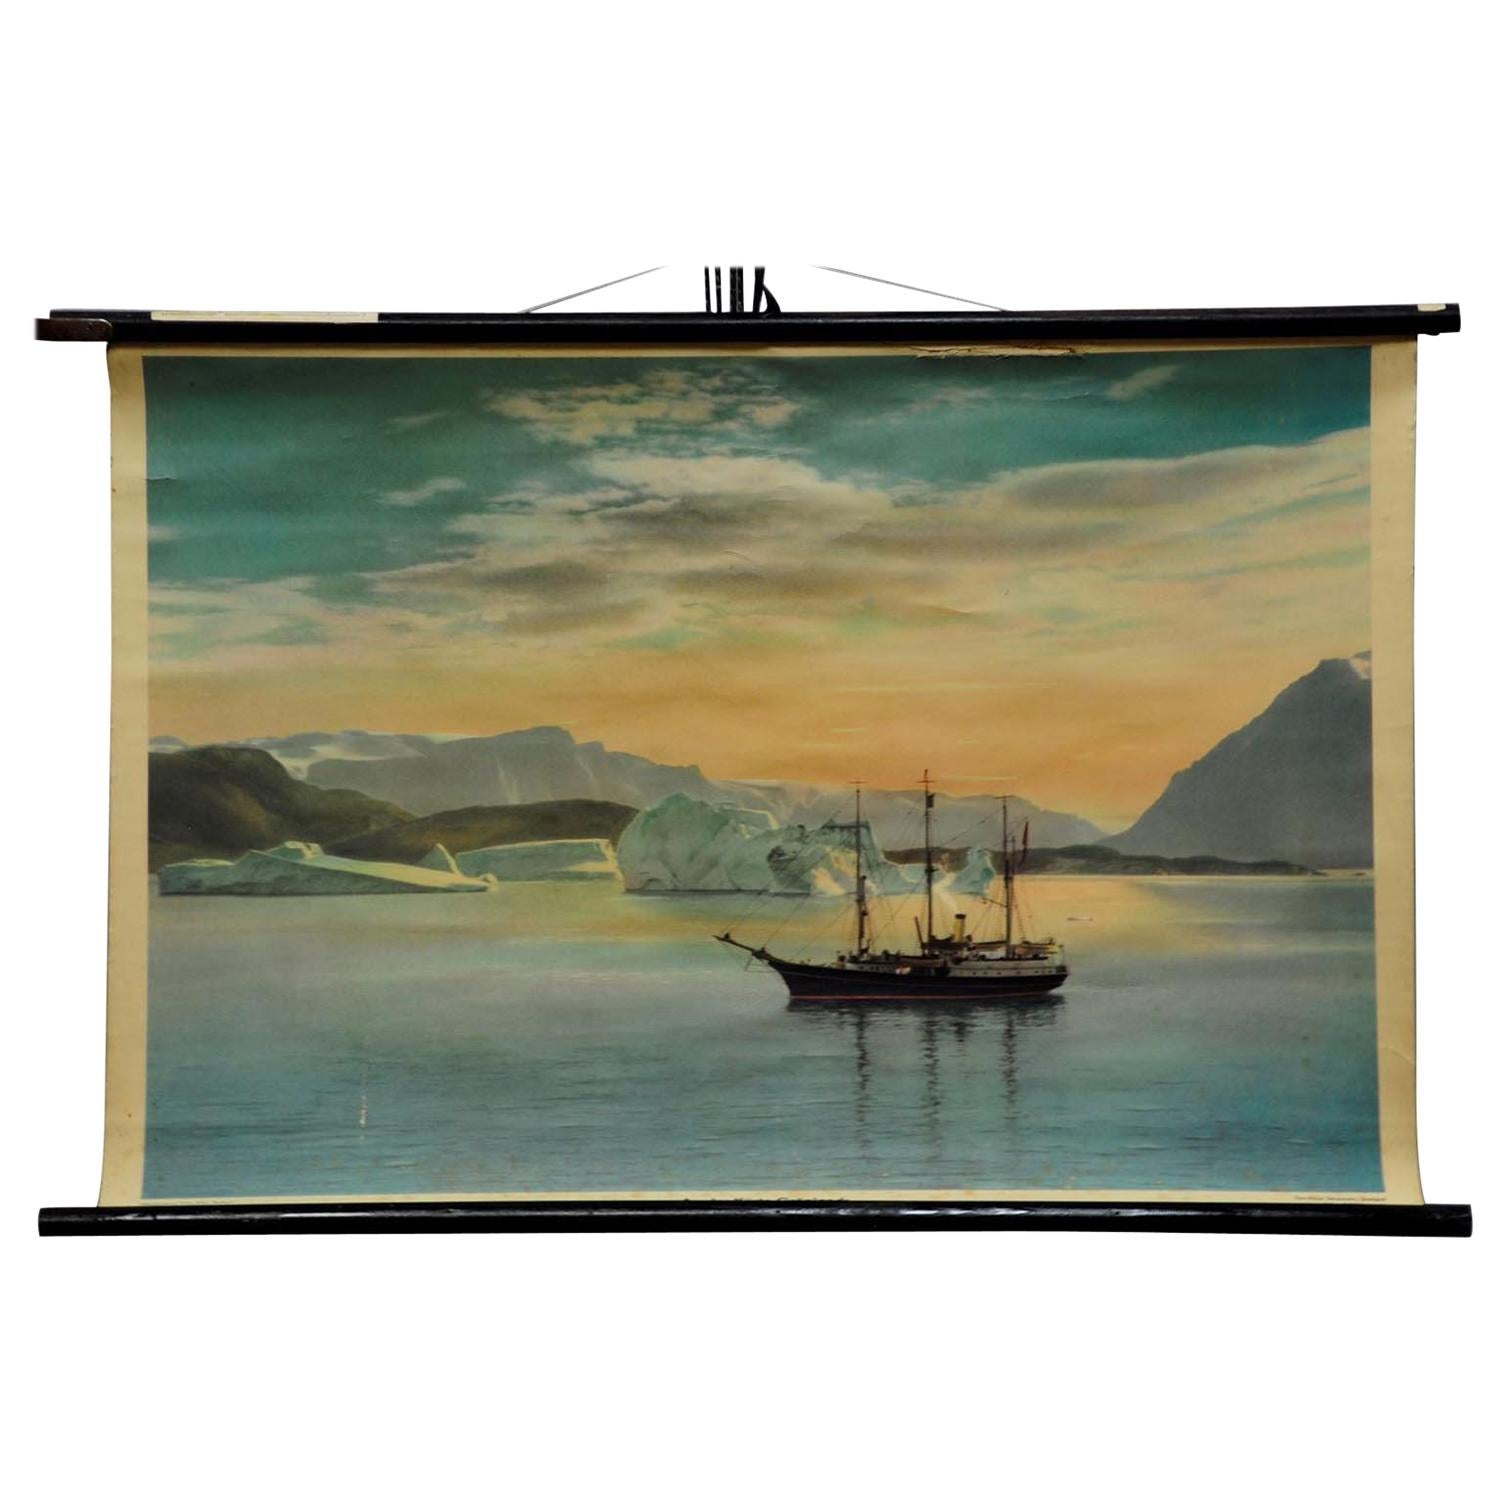 Vintage Mural Pull Down Wall Chart Landscape Sailing Ship the Coast of Greenland For Sale